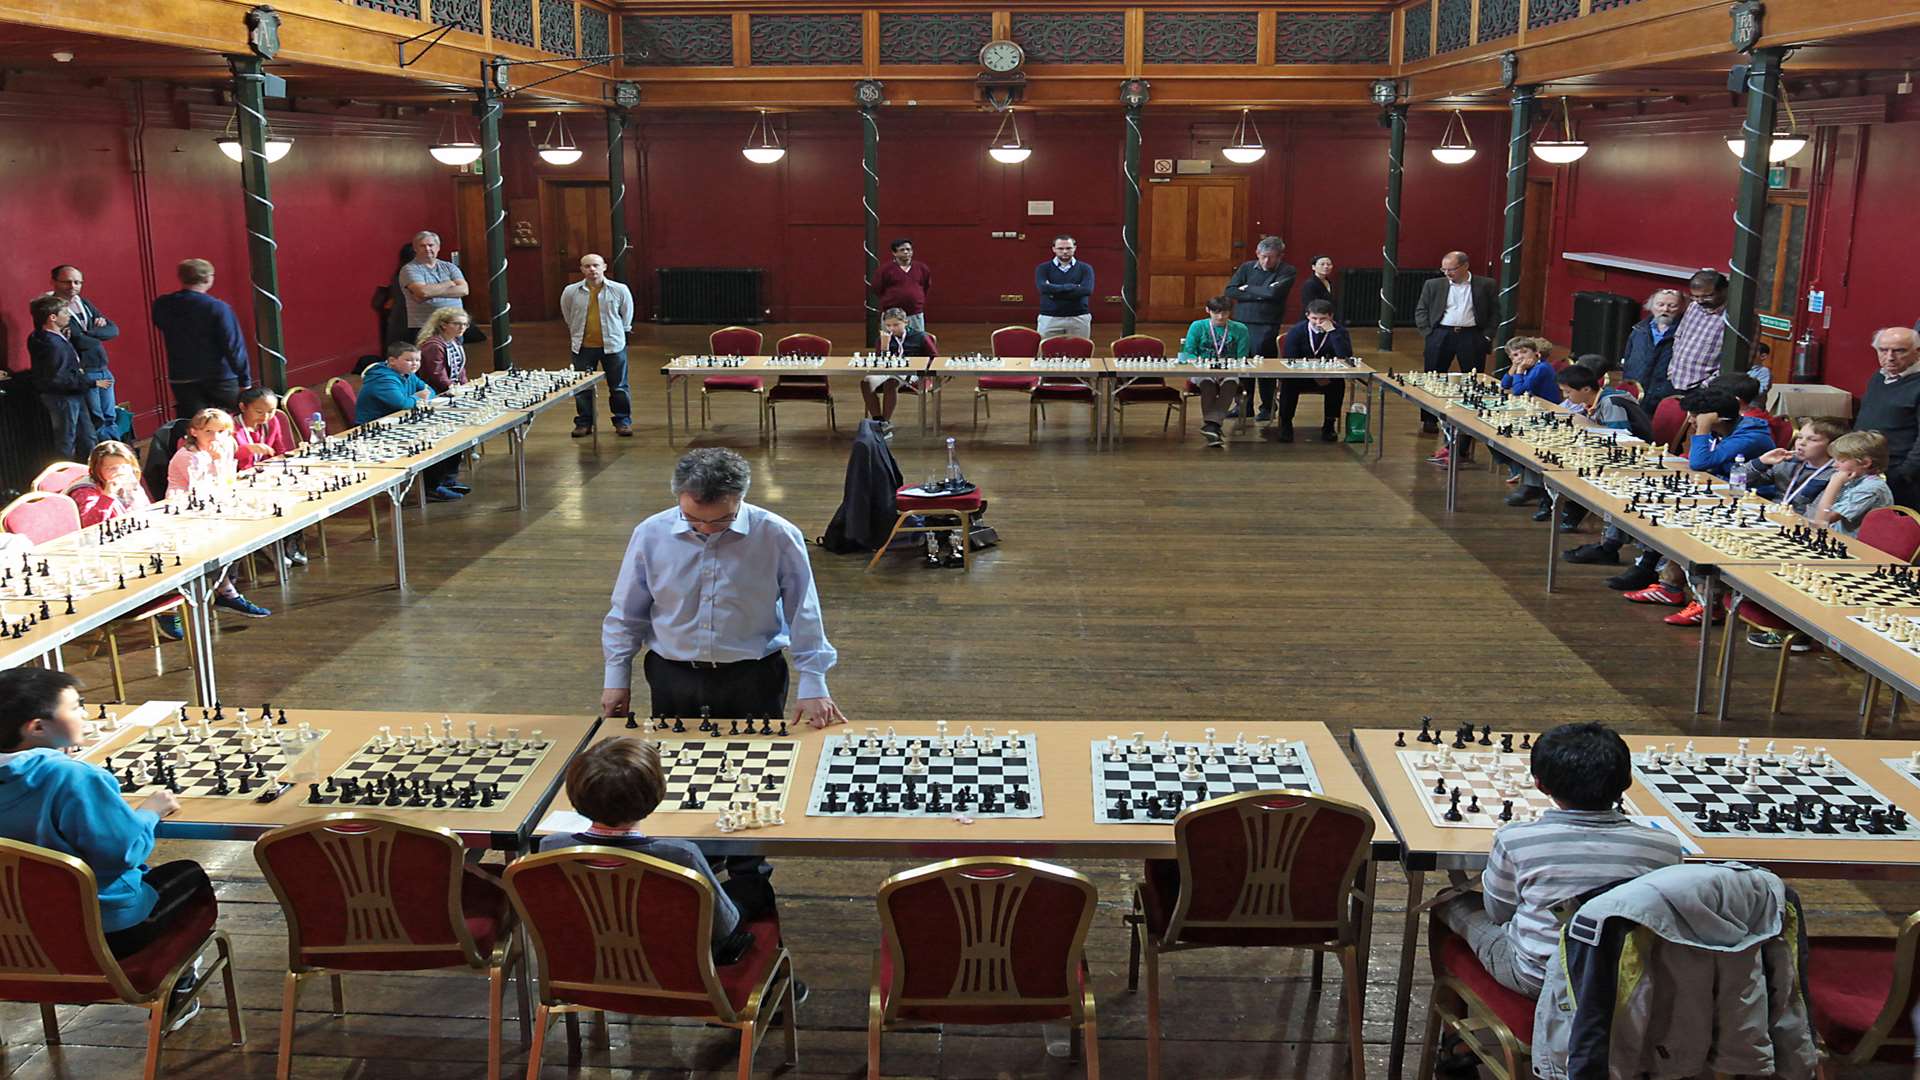 John Emms in action against some of the 34 young chess players who took part in the tournament at the Salomons Estate